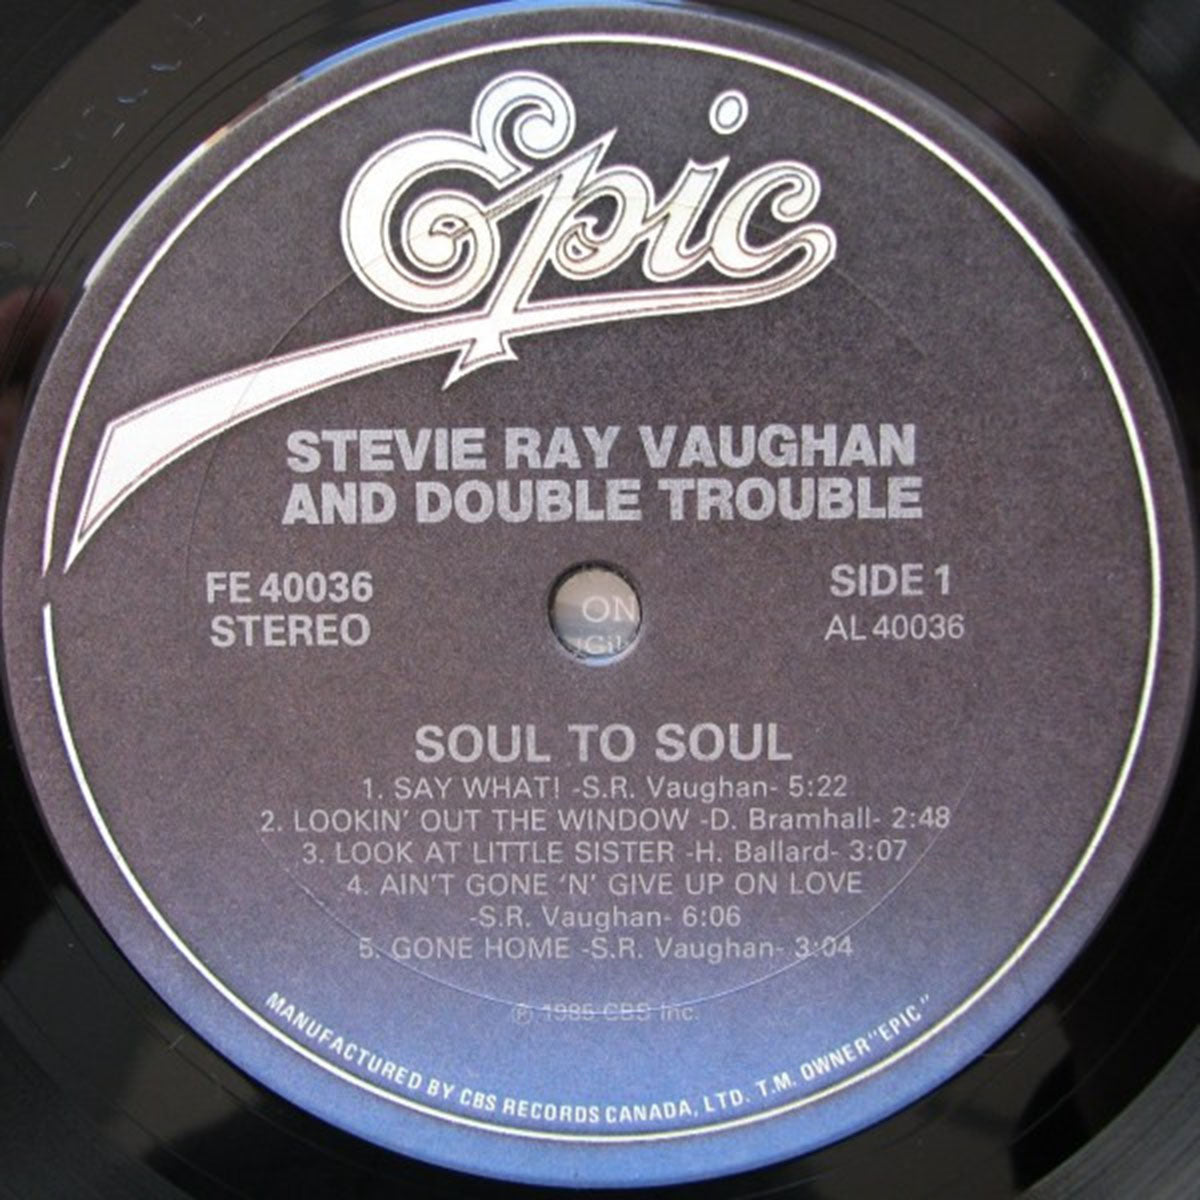 Stevie Ray Vaughan And Double Trouble – Soul To Soul - 1985 Original!